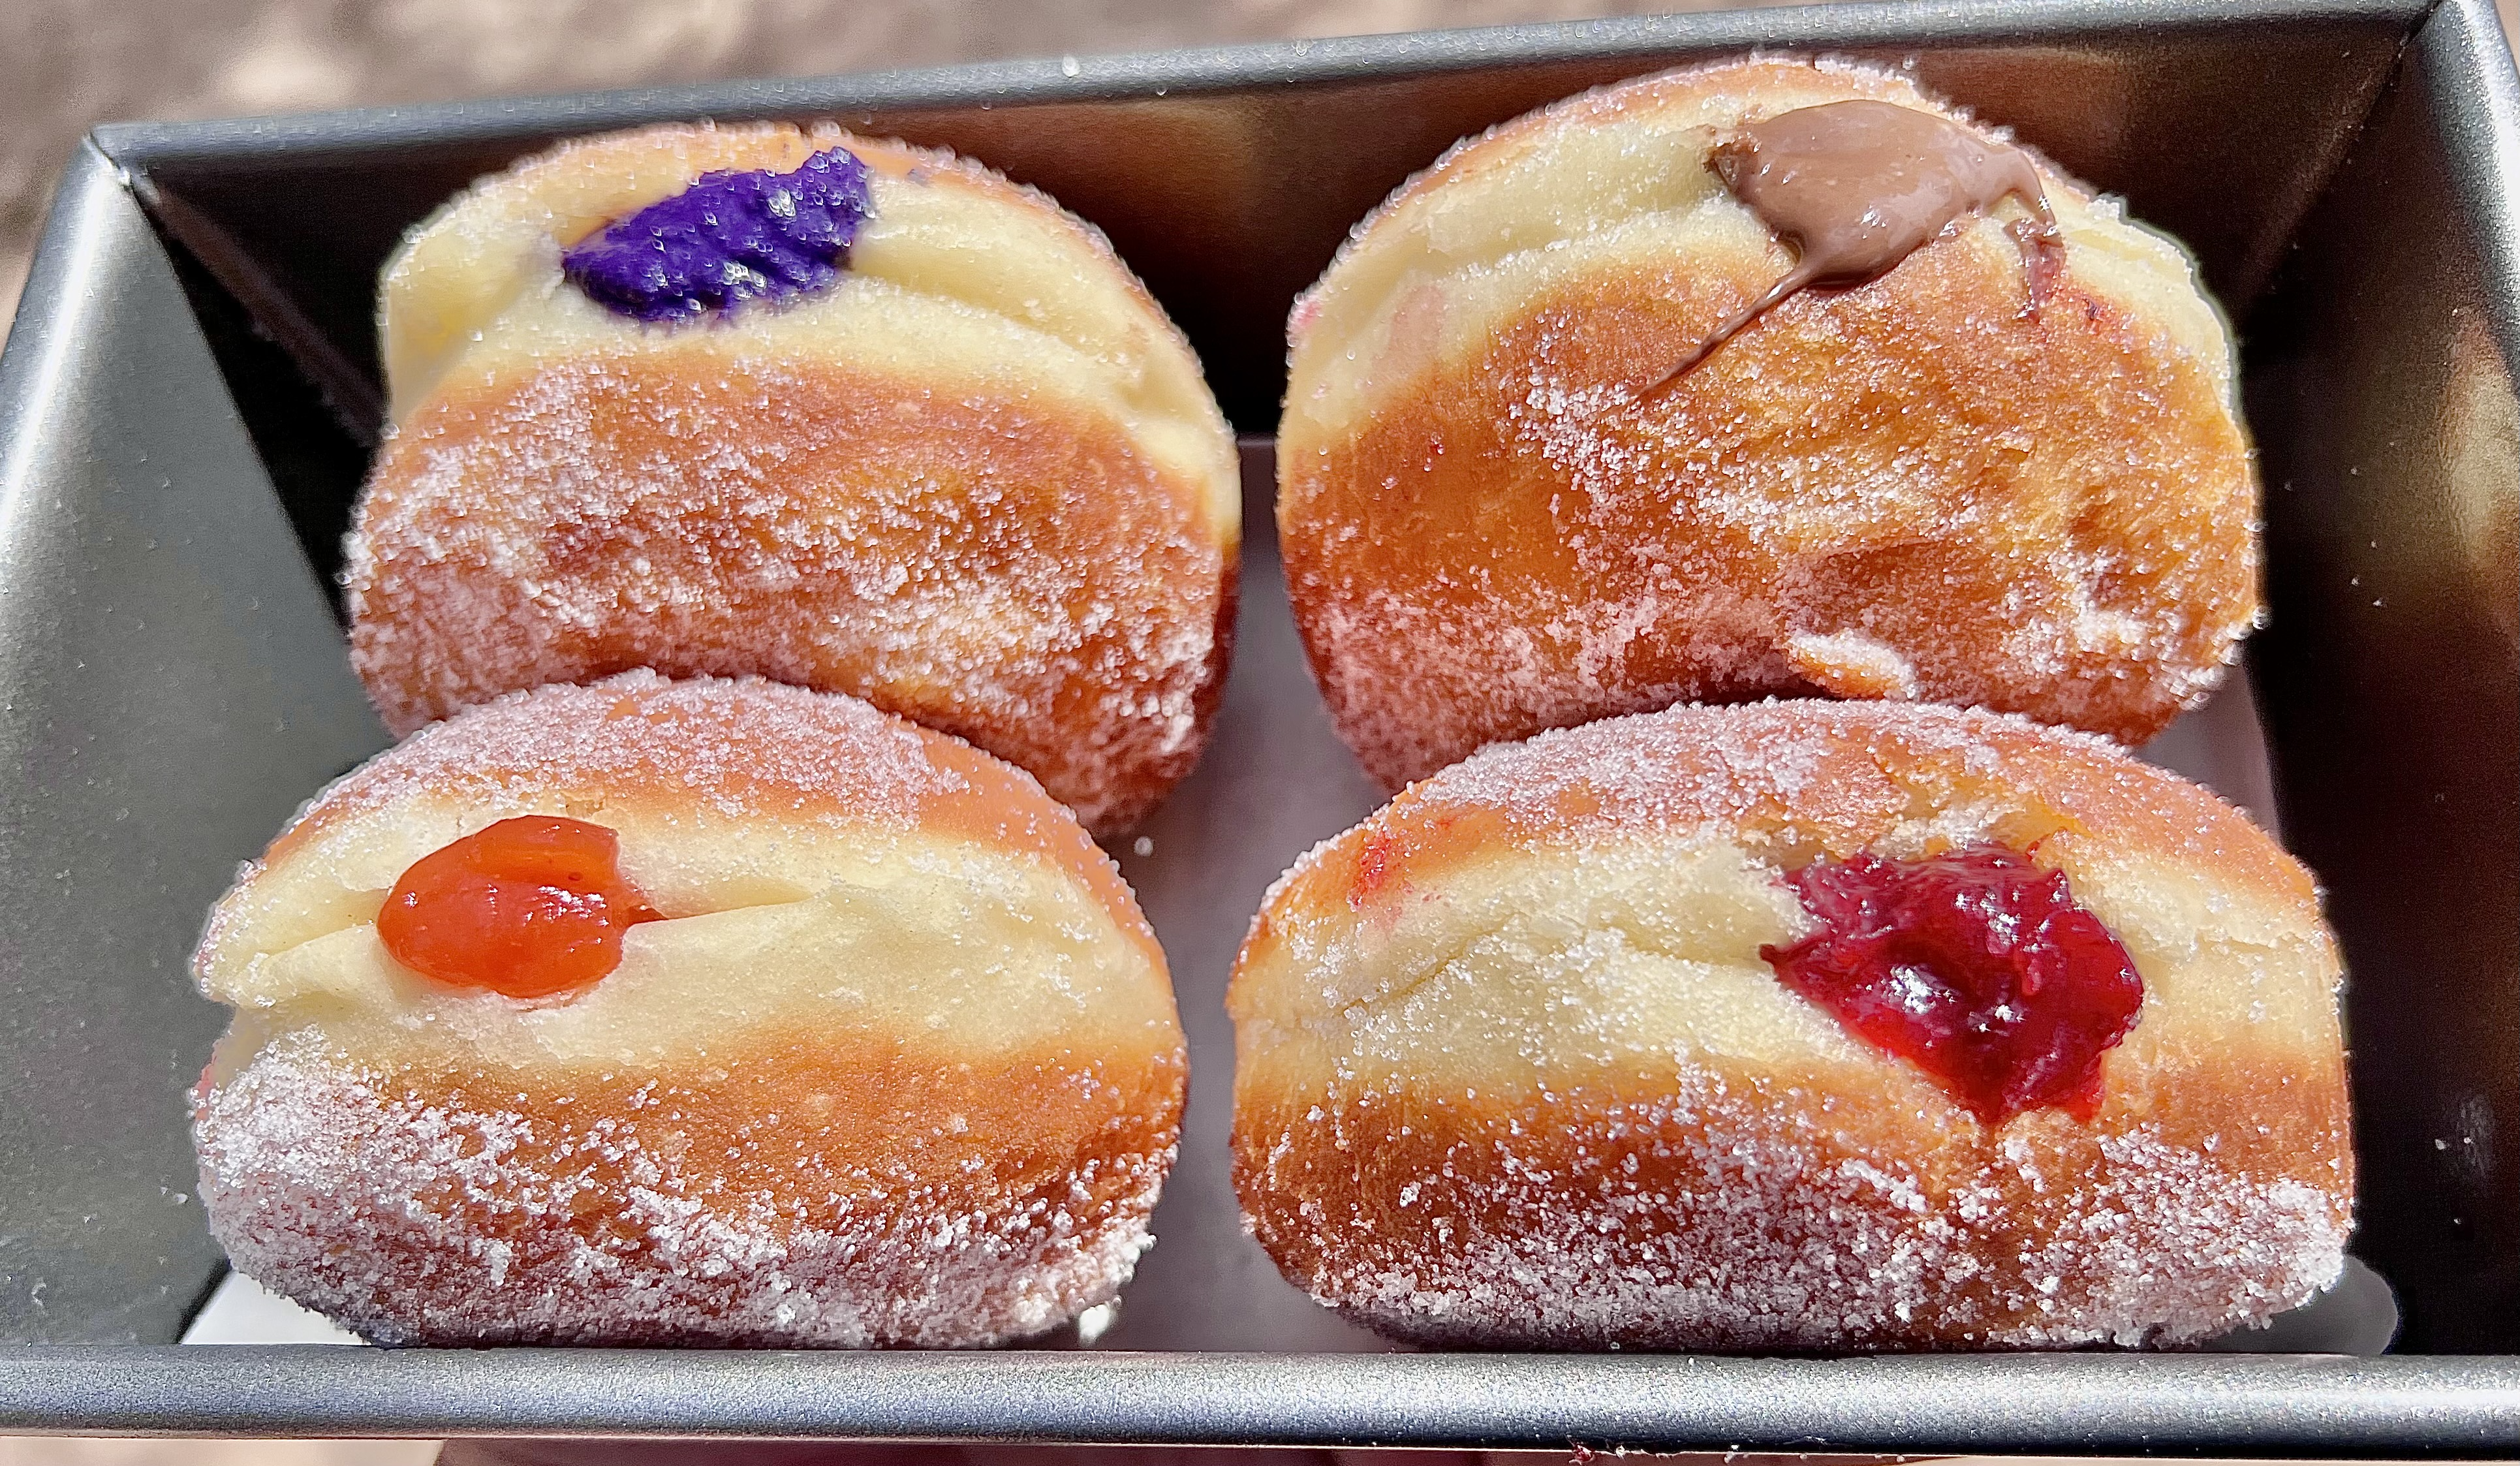 a picture of four cream and jelly filled donuts